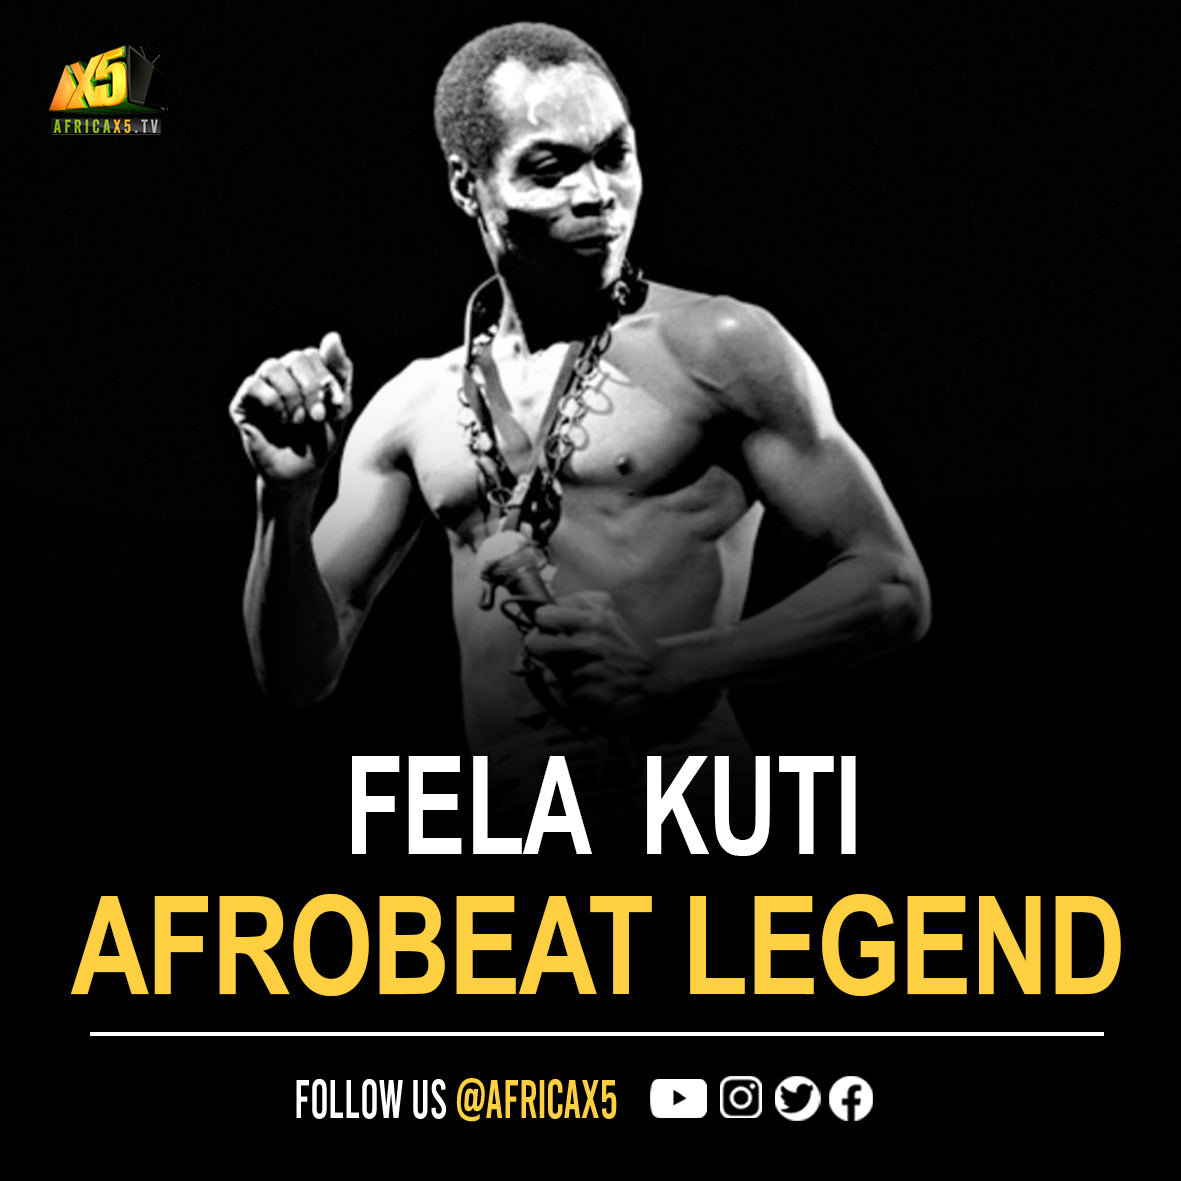 Legendary Father of Afrobeats, Fela Kuti, Honored With Exhibition In Paris